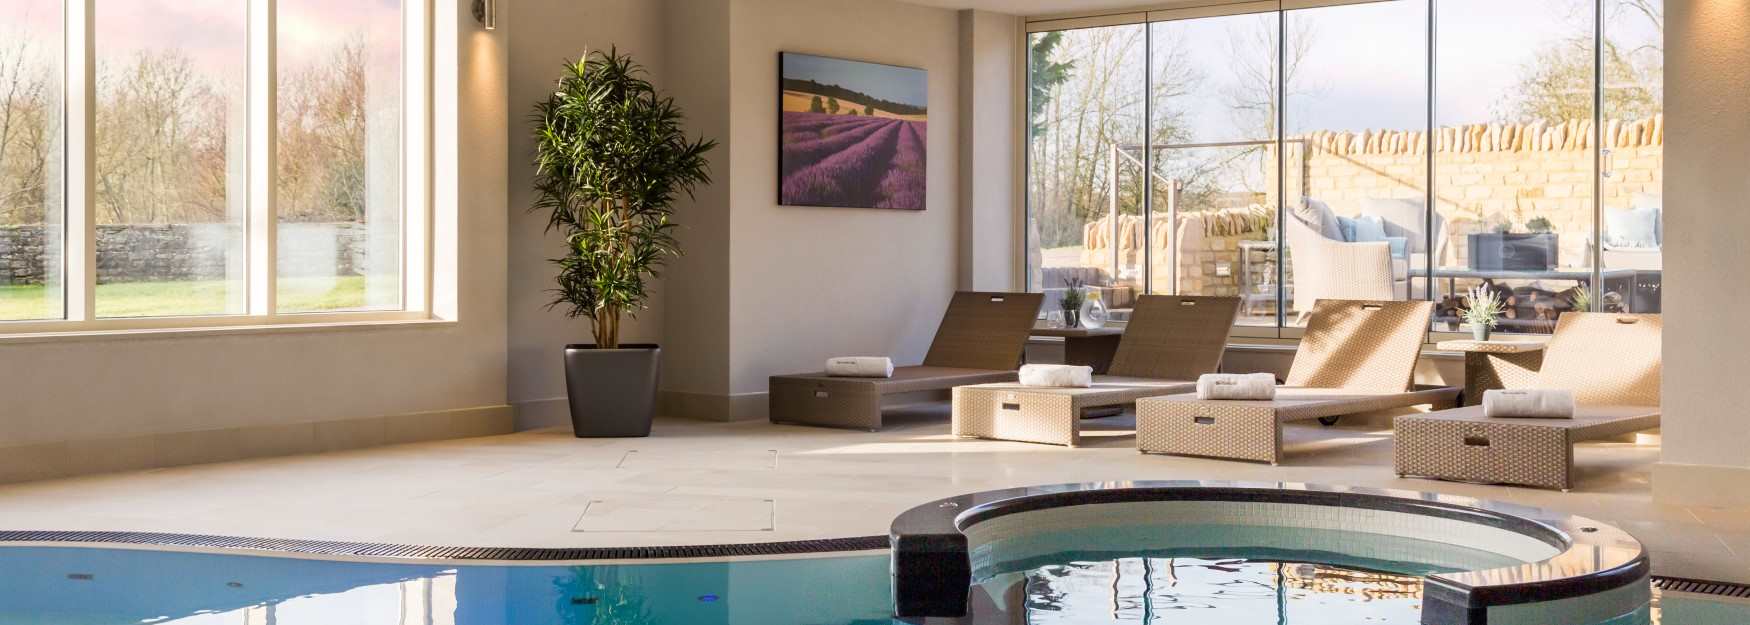 The swimming pool at the spa at Minster Mill hotel in Minster Lovell